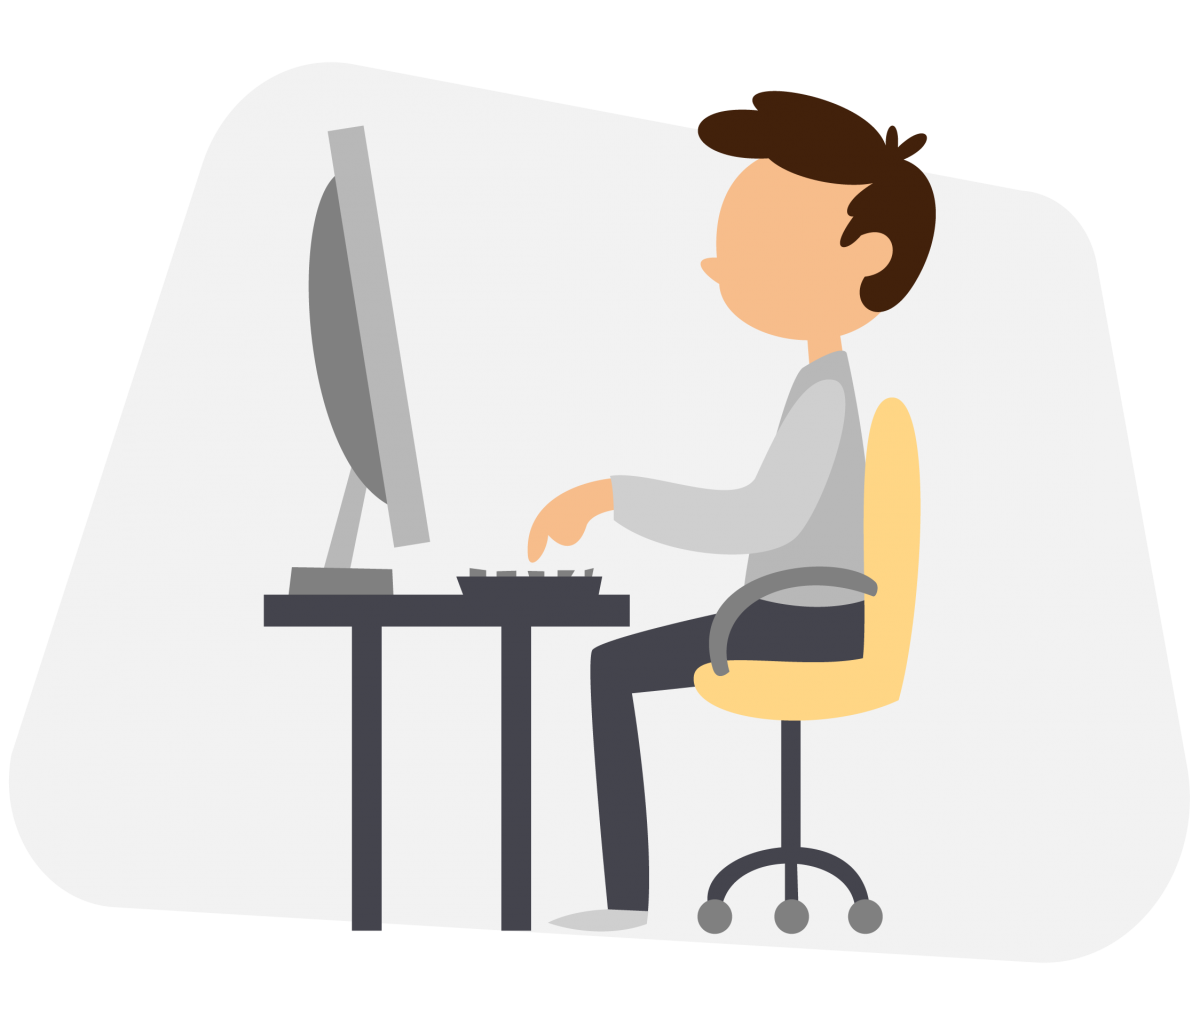 This illustration shows a boy with brown hair sat at a computer desk in a yellow desk chair.